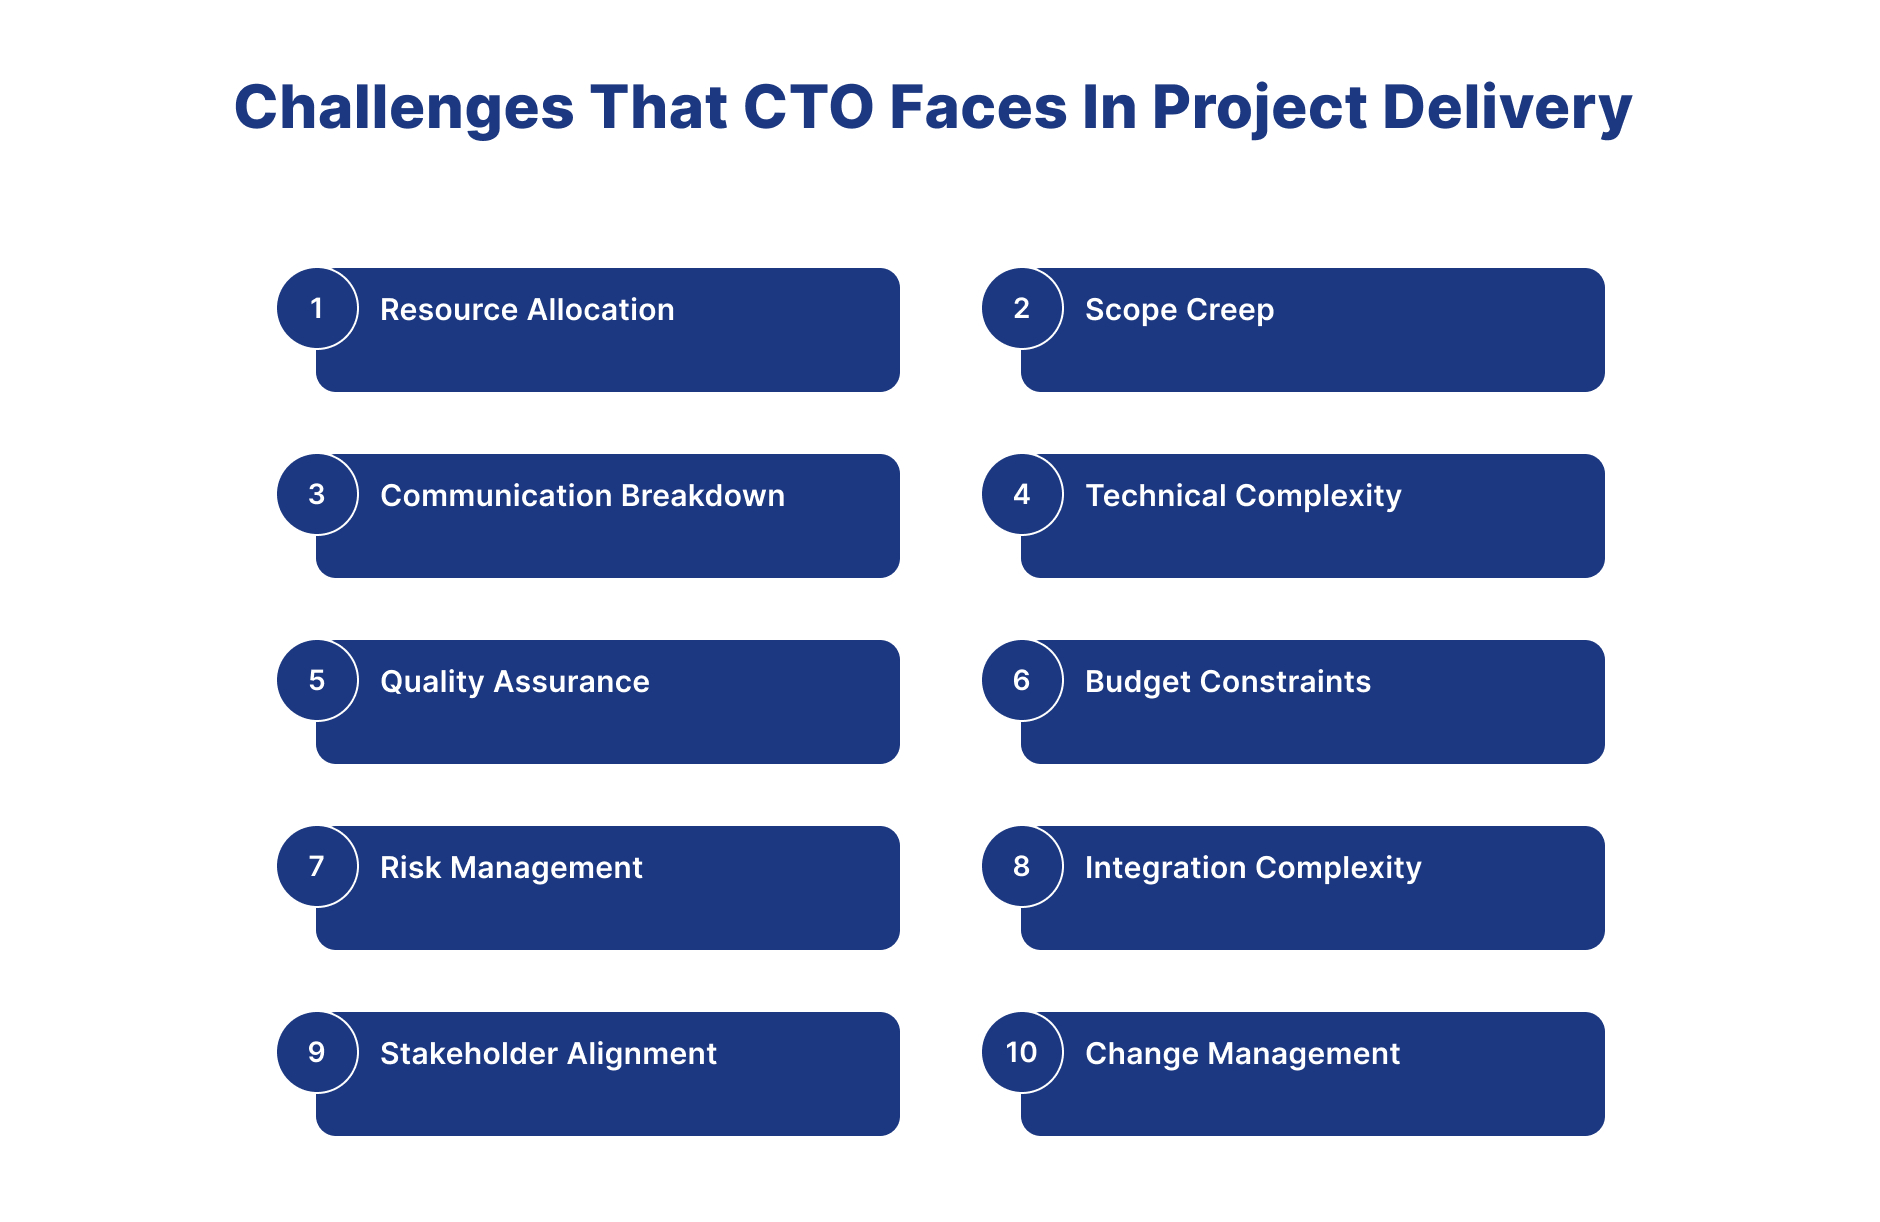 CTOs in Overcoming Project Delivery Challenges